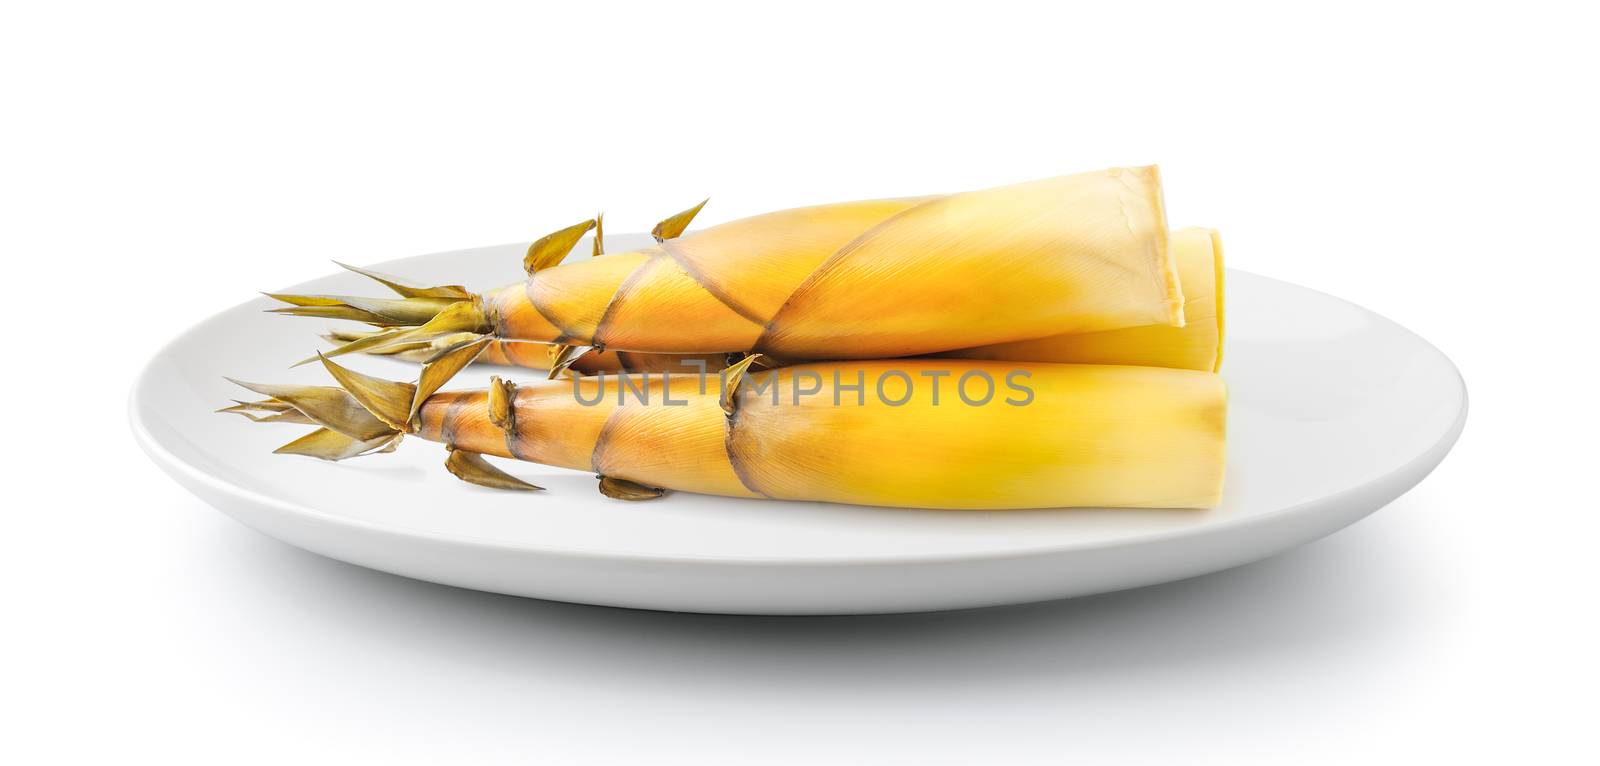 Bamboo shoot in a plate isolated on white background